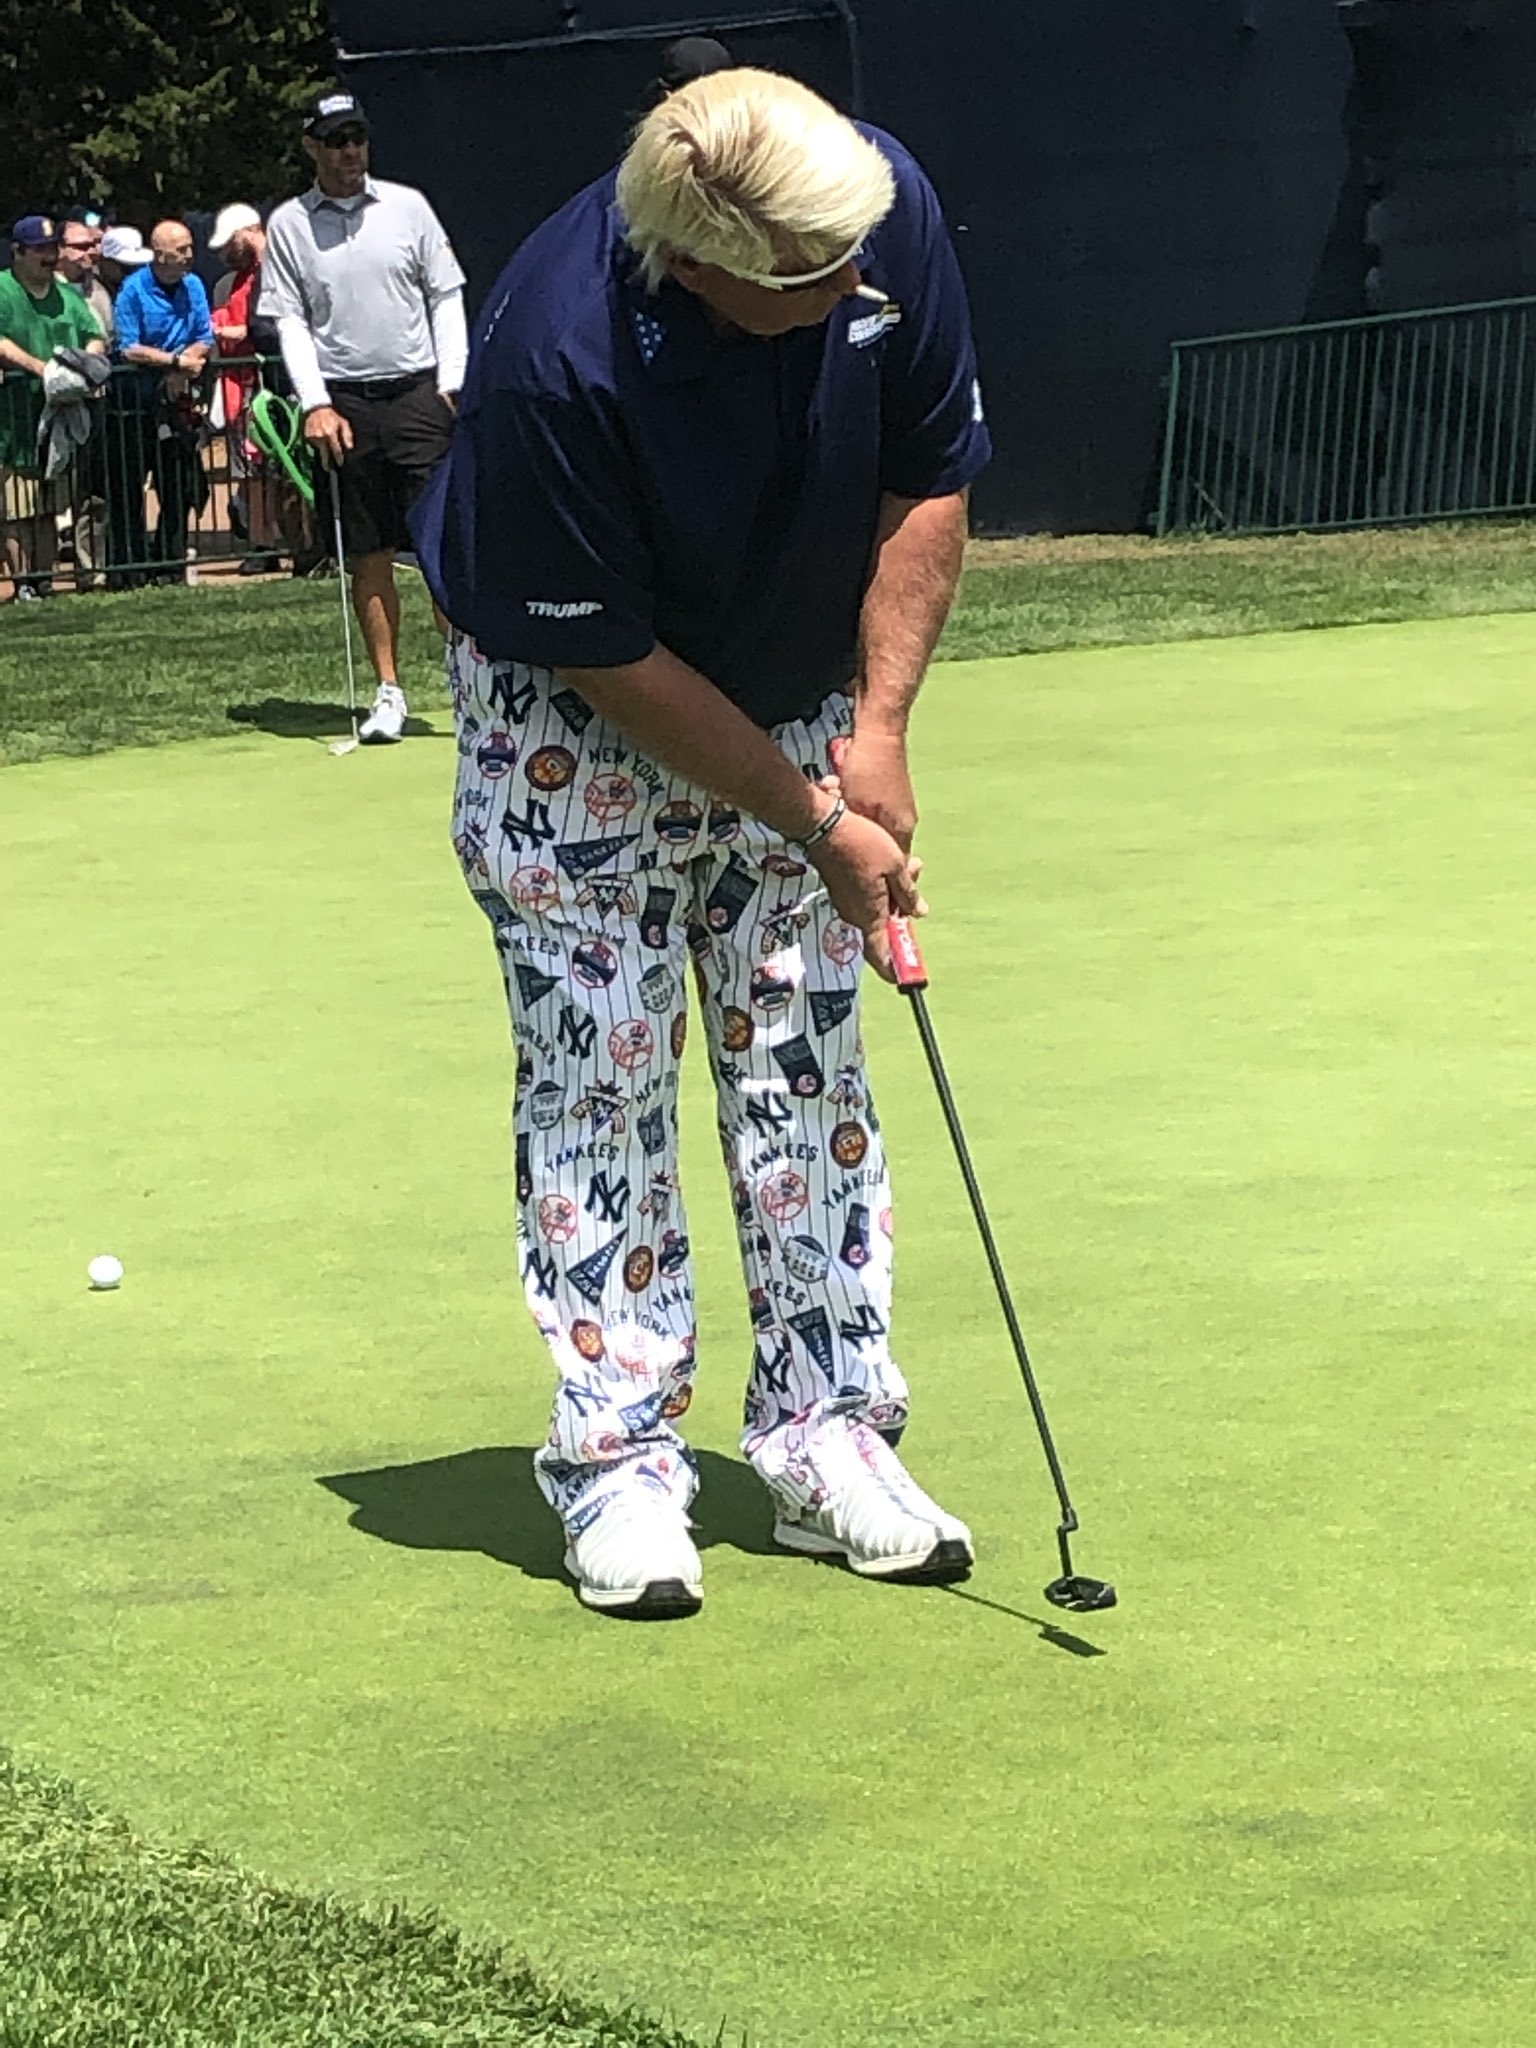 Golf fans react to John Daly's crazy USPGA outfit as 1991 champ